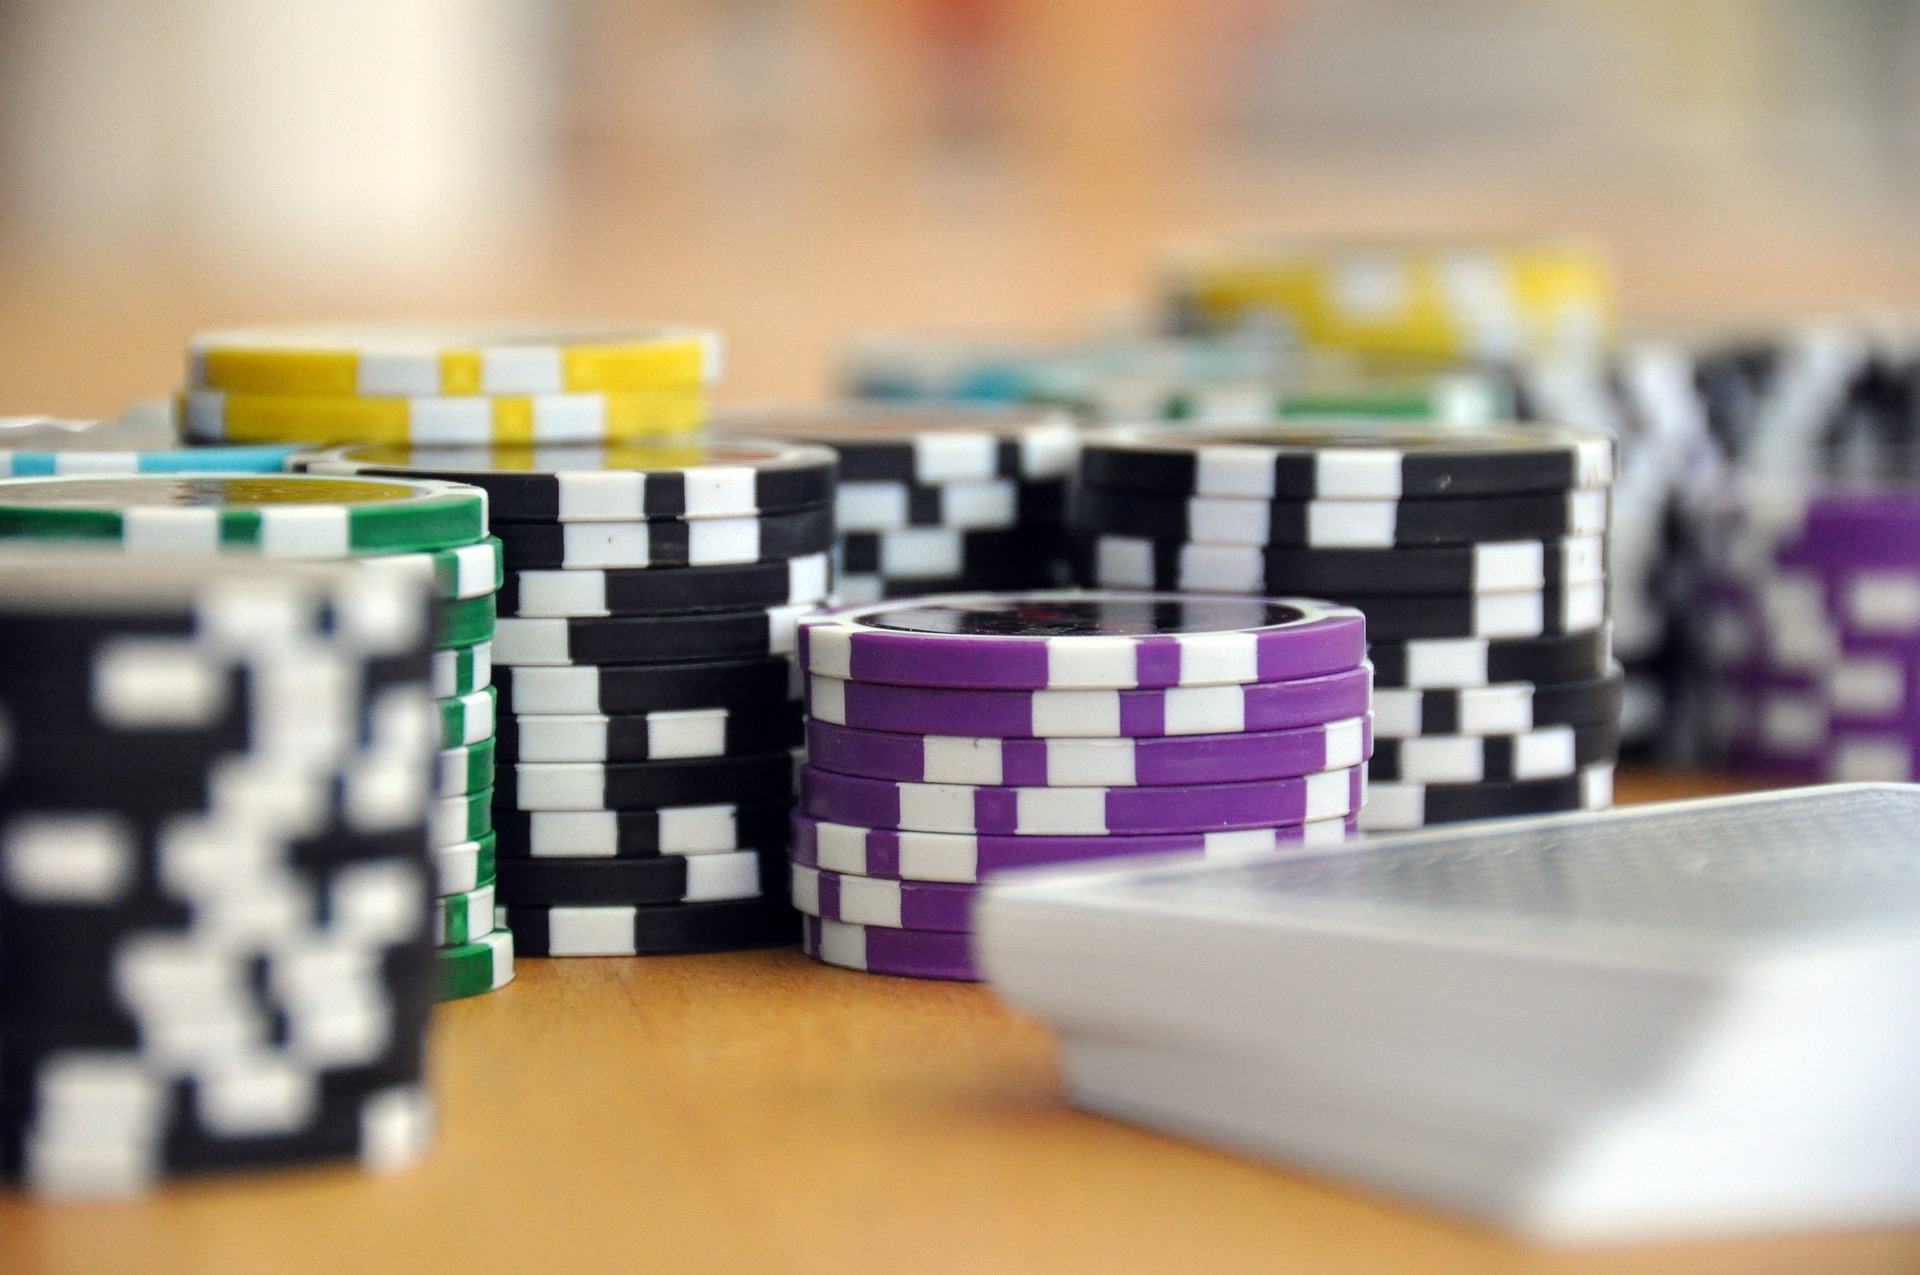 There are great poker strategies you can use